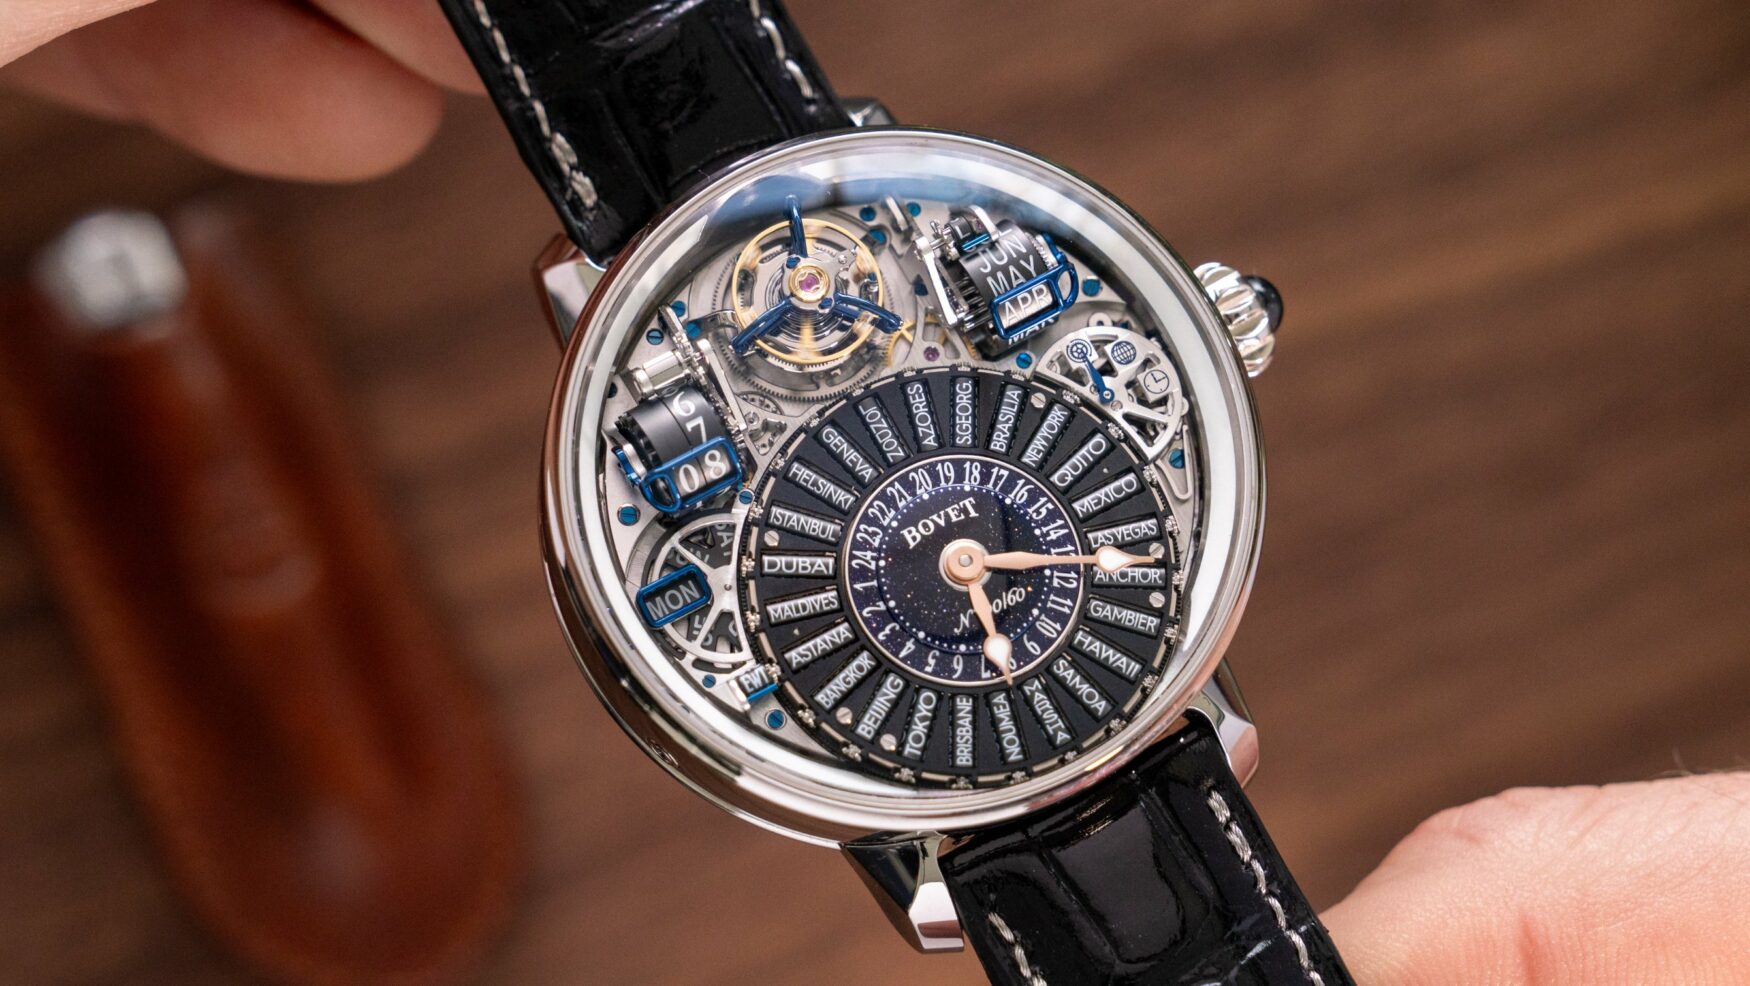 The Bovet Récital 28 Prowess 1 is the first watch ever to acknowledge daylight savings